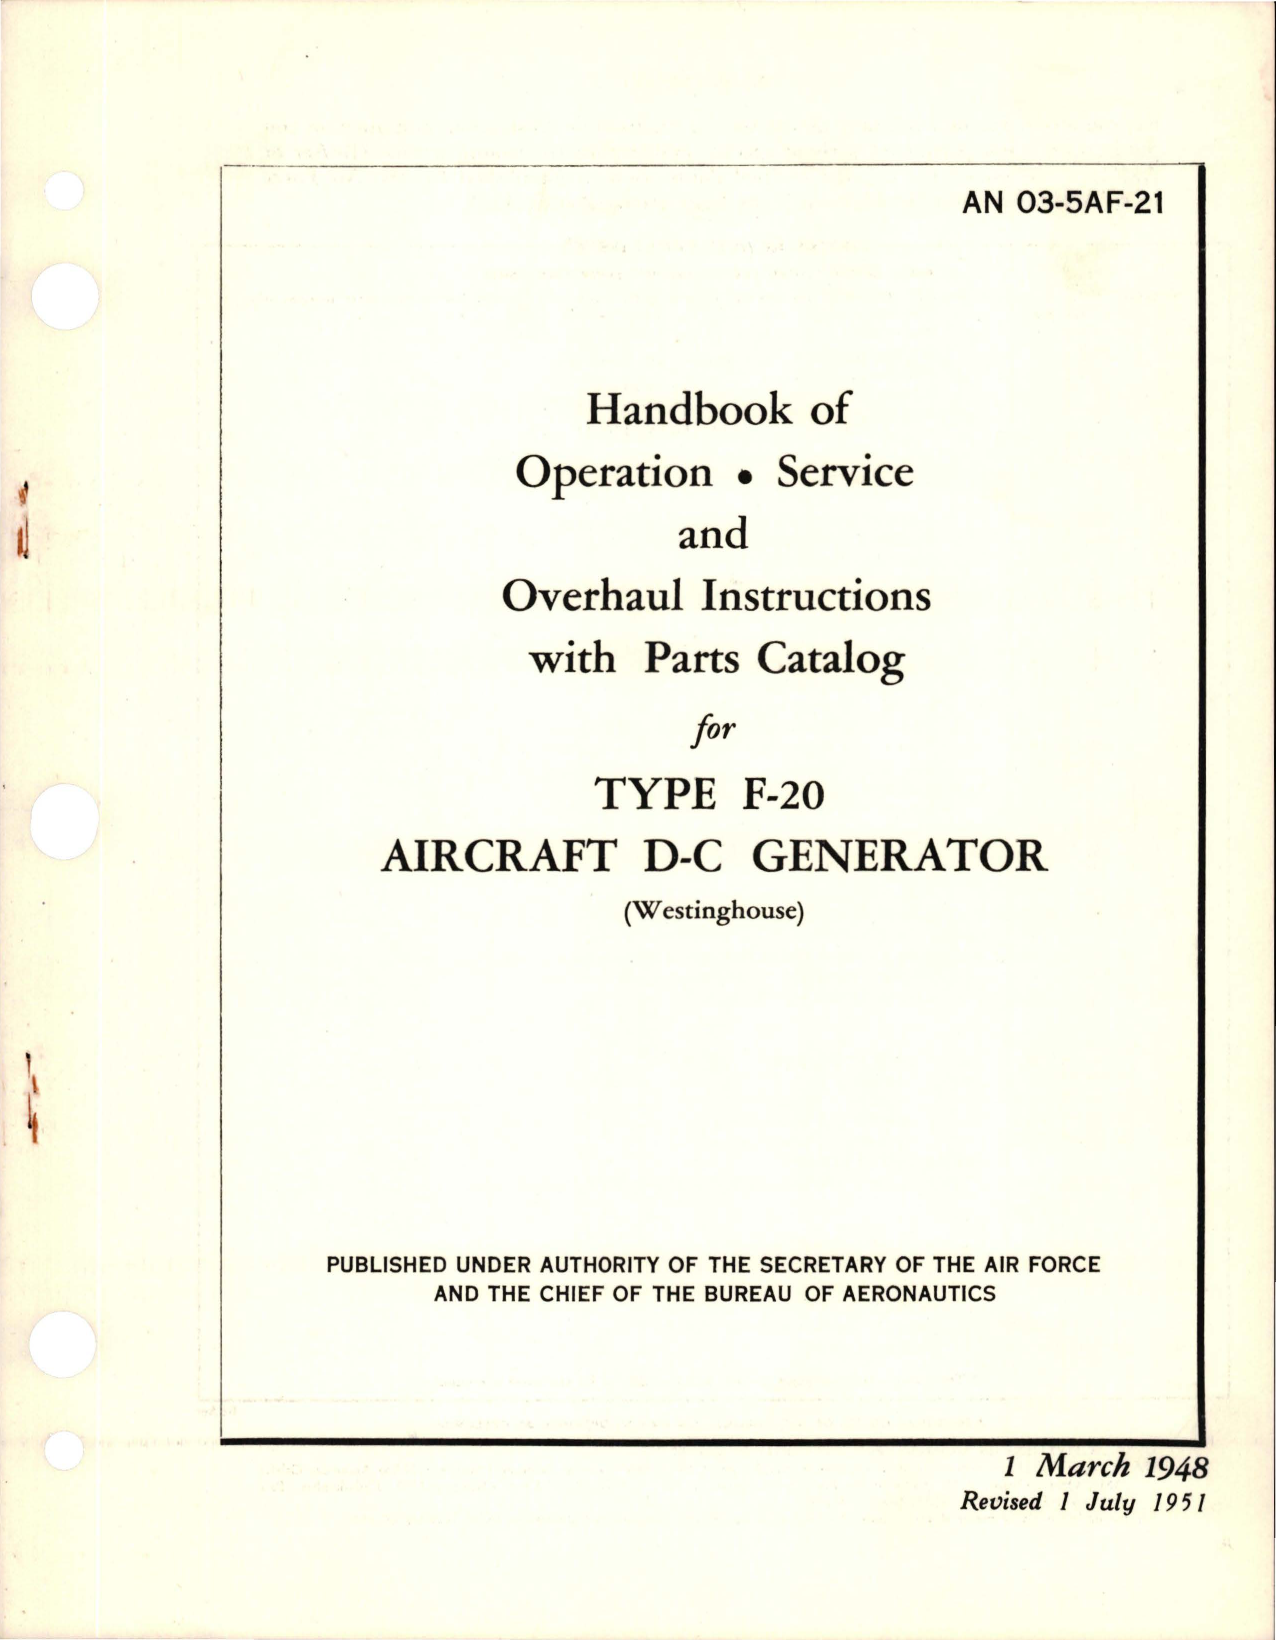 Sample page 1 from AirCorps Library document: Operation, Service and Overhaul Instructions with Parts Catalog for Aircraft DC Generator - Type F-20